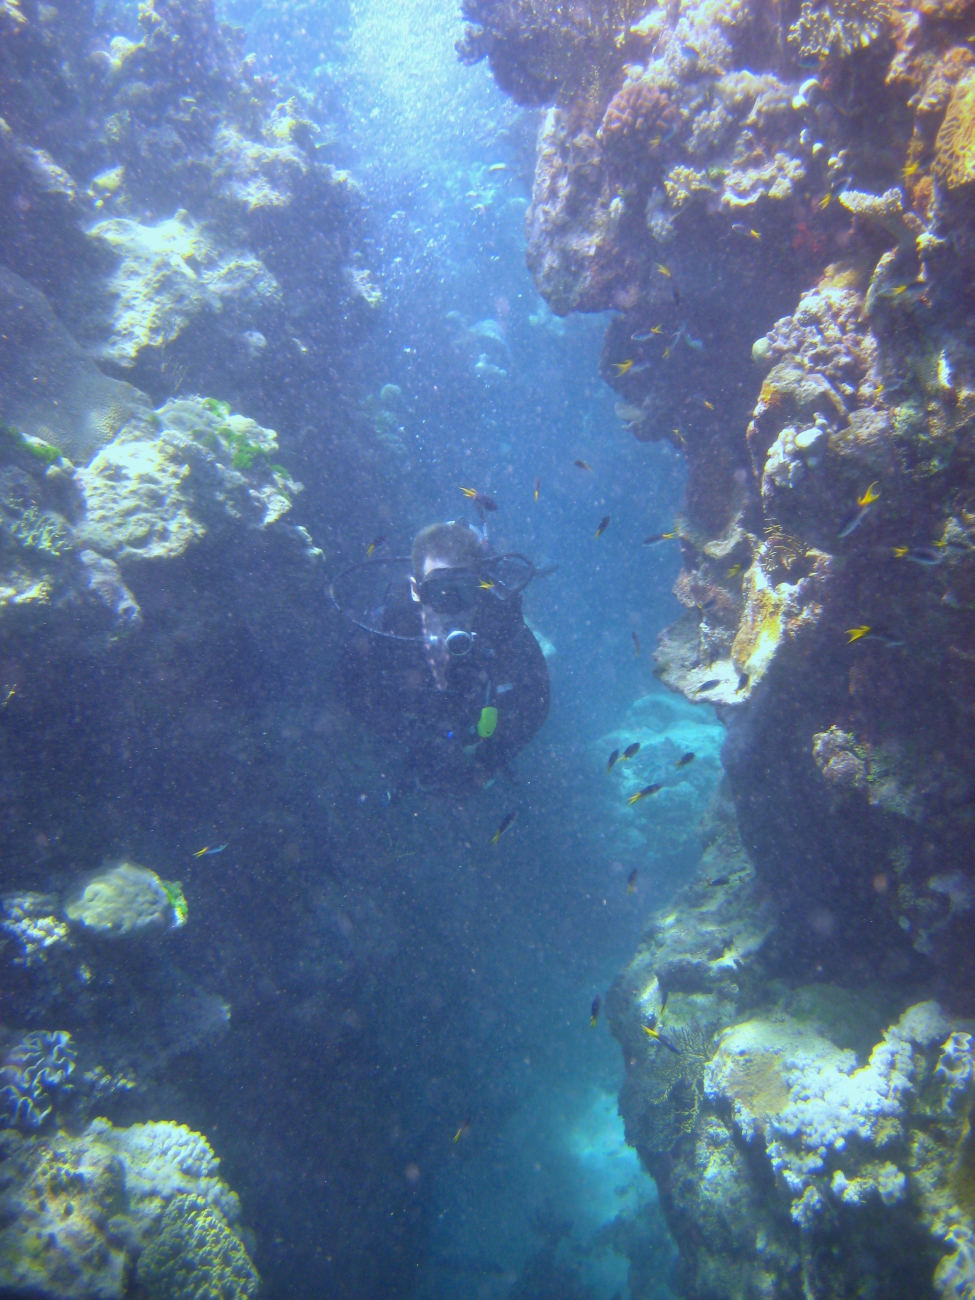 Scuba diver investigating a crevice in the reef